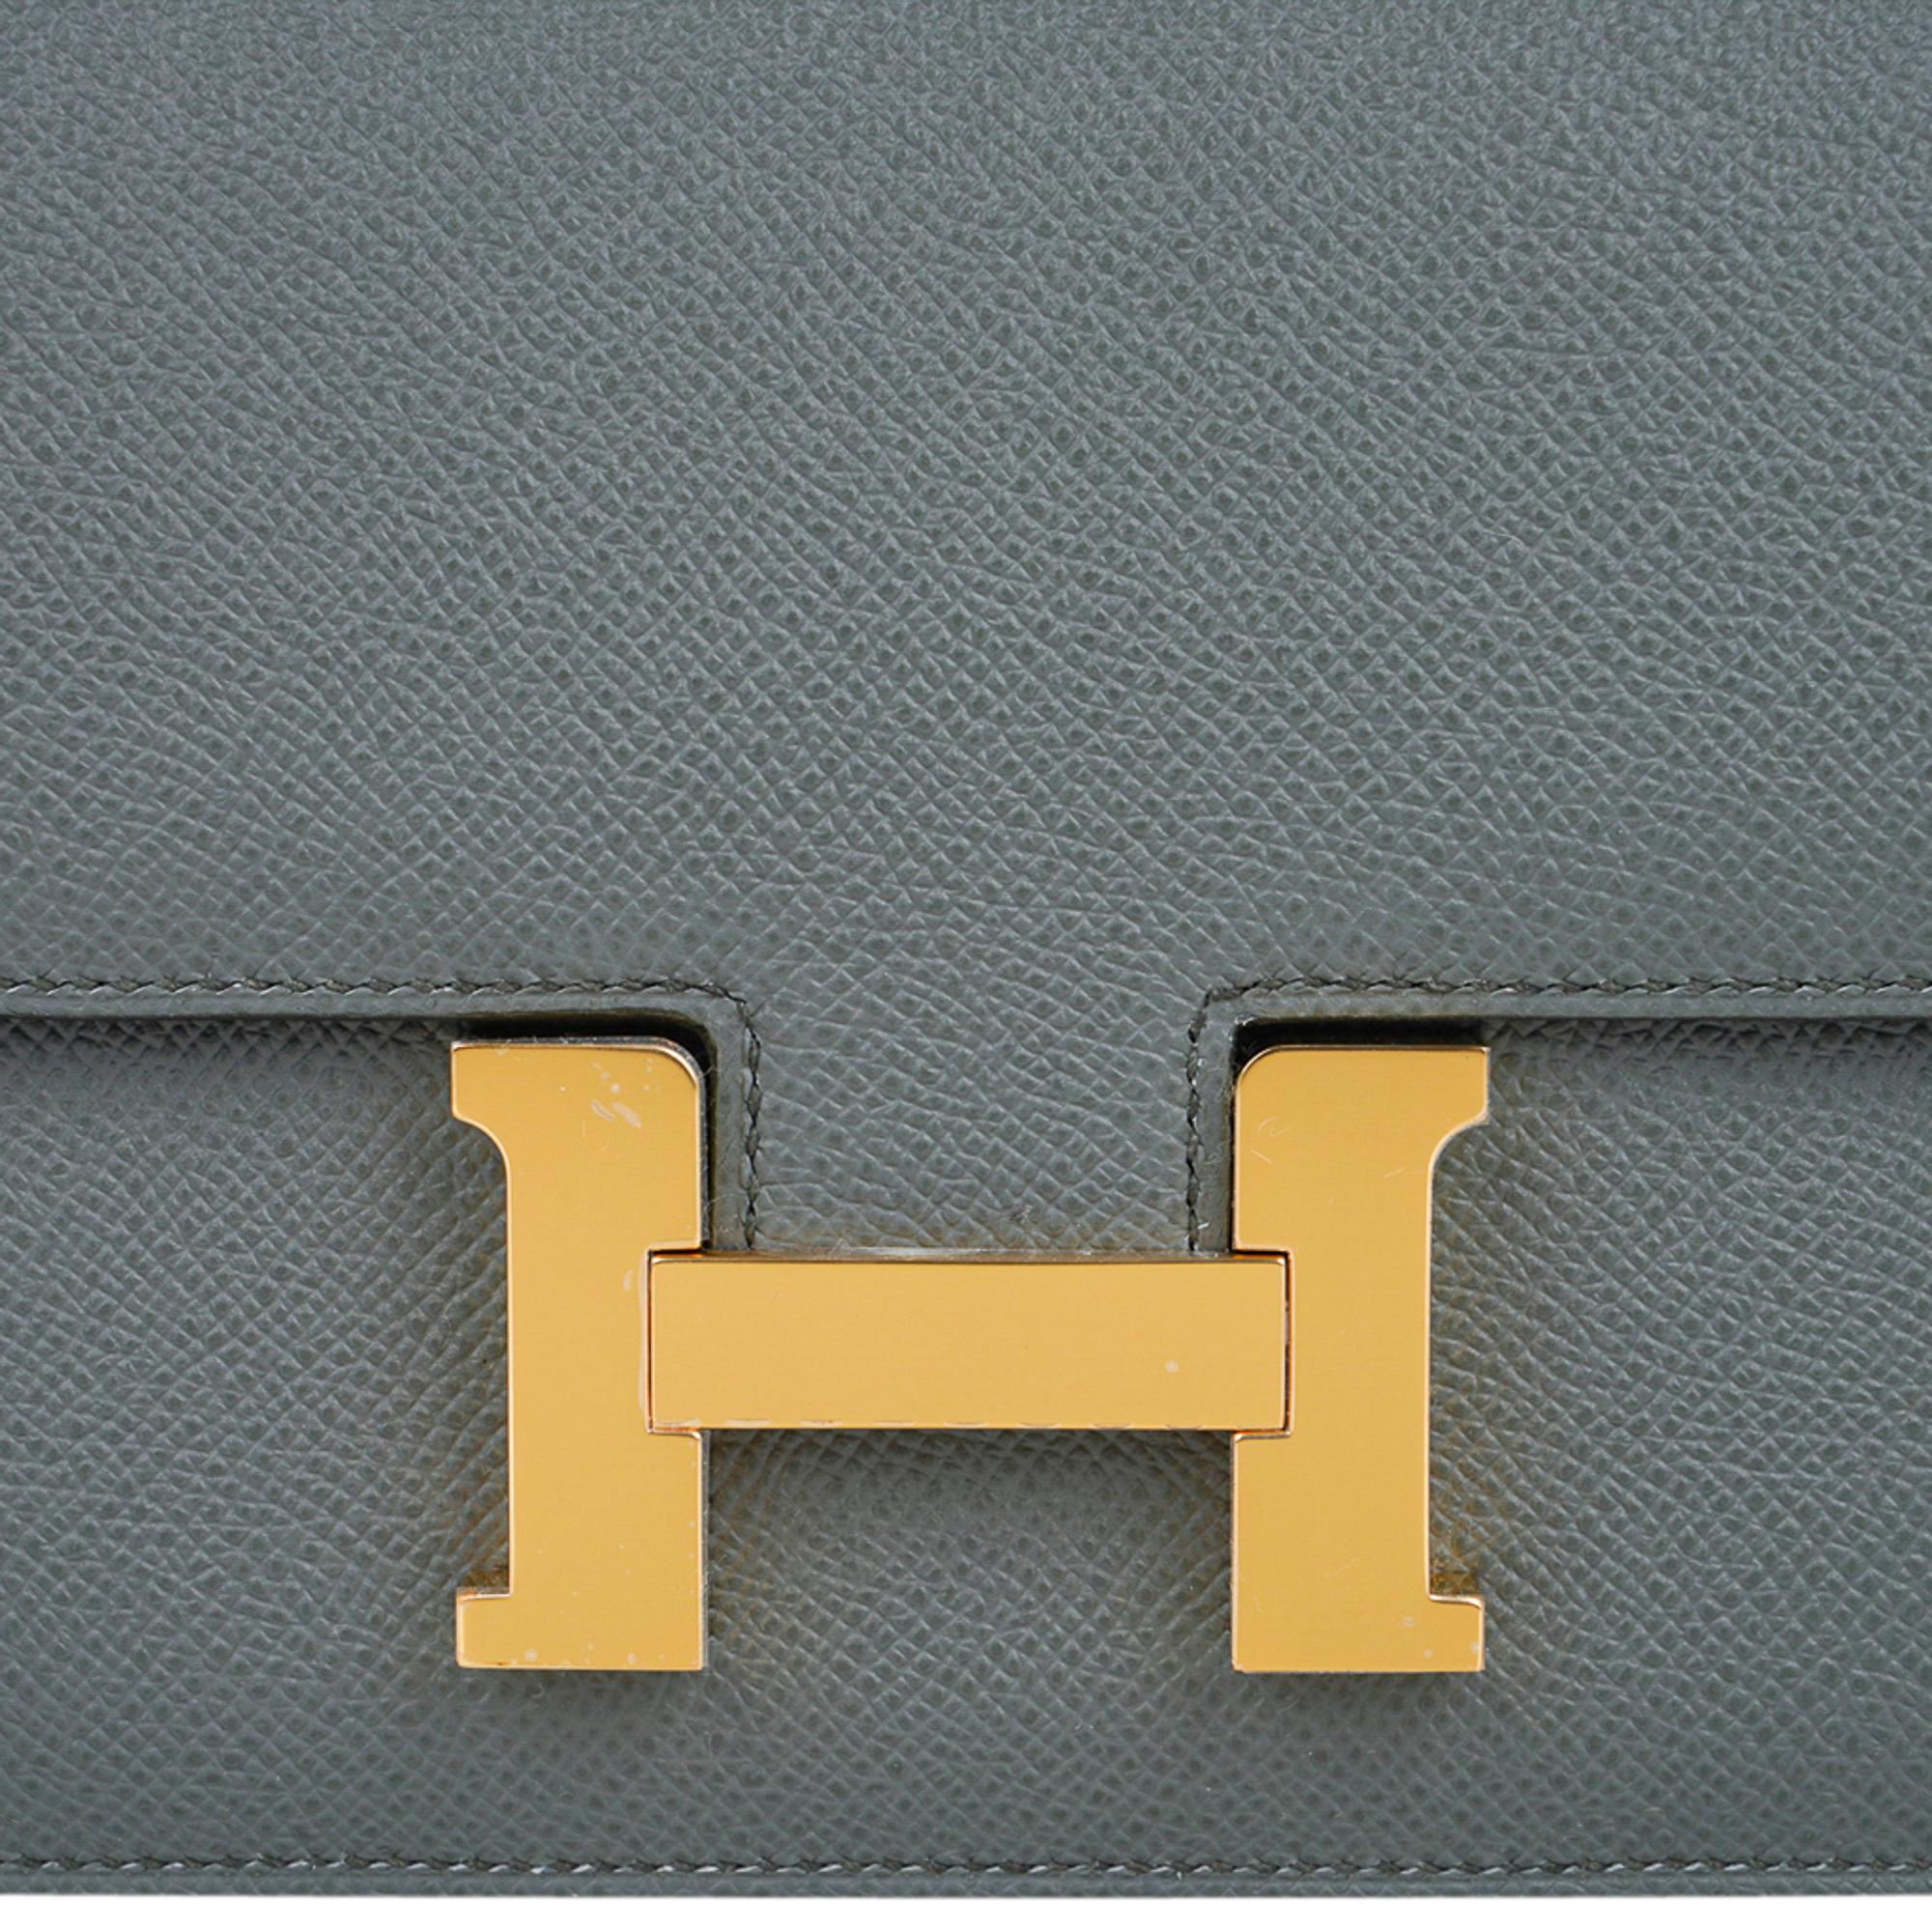 Mightychic offers an Hermes Constance 18cm mini bag featured in stunning Vert Amande.
Rich with gold hardware.
HERMES MADE IN FRANCE is stamped on front under flap.
Comes with signature Hermes box and sleeper.
NEW or NEVER WORN.
The Hermes Constance